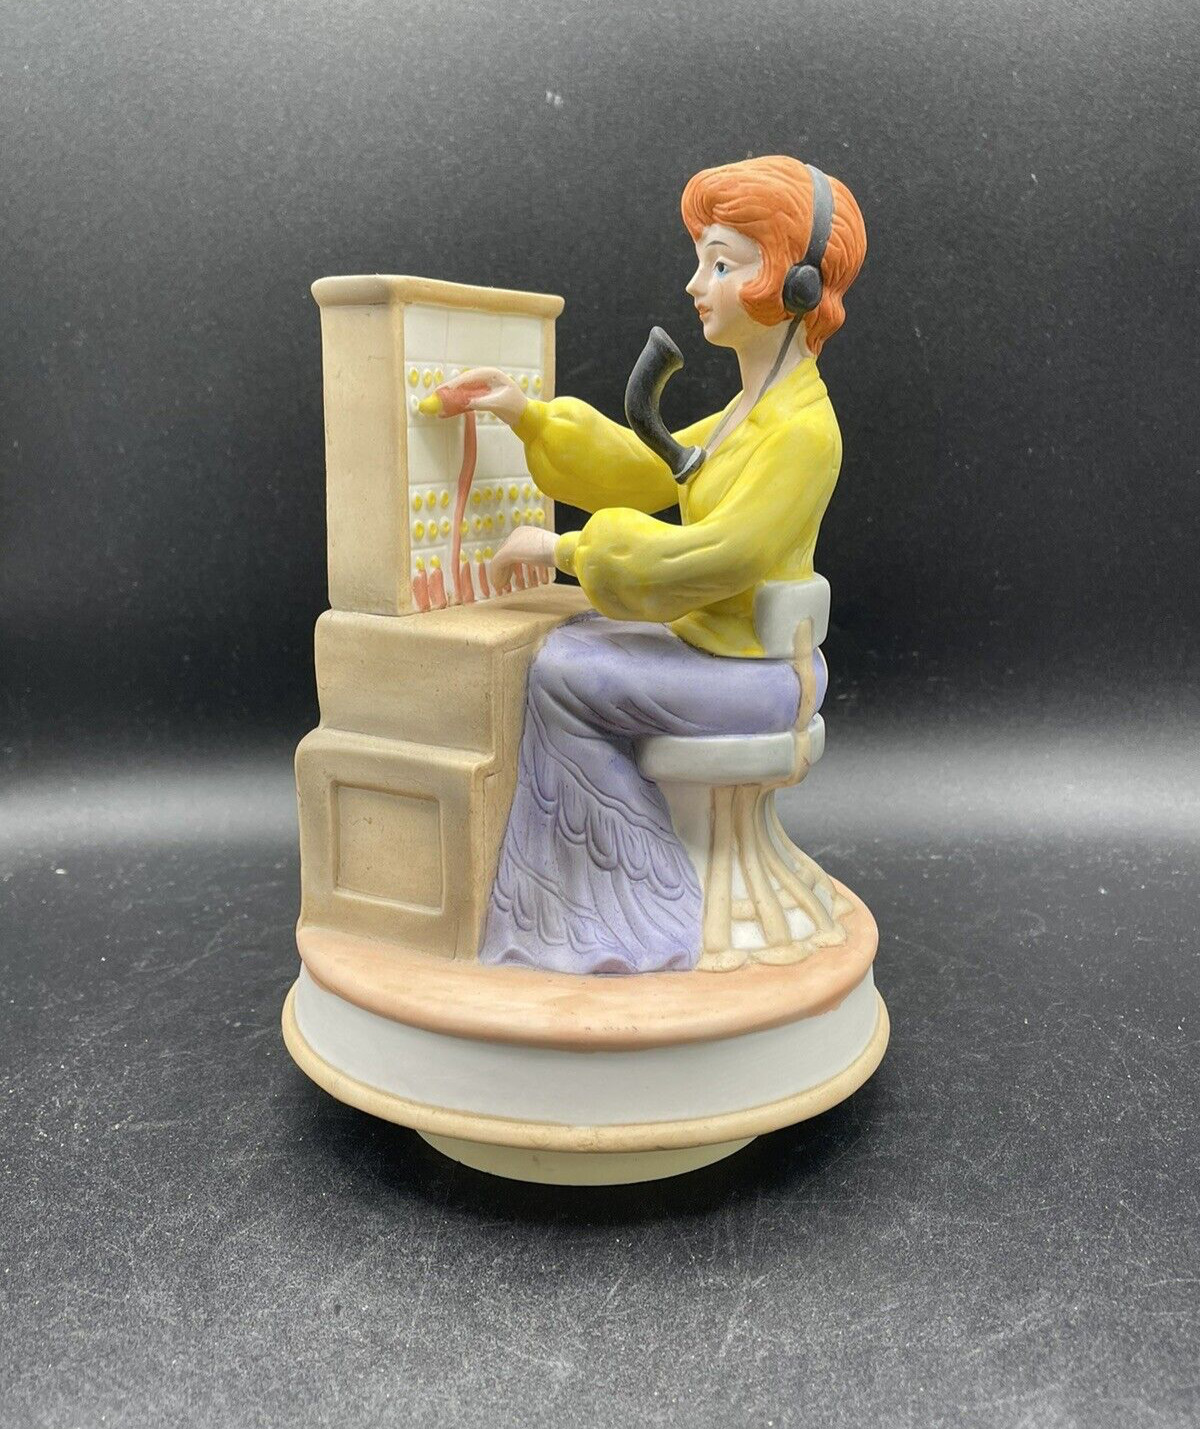 Music Box Telephone Switchboard Operator Bisque Porcelain Vintage F.S.P. Inc.